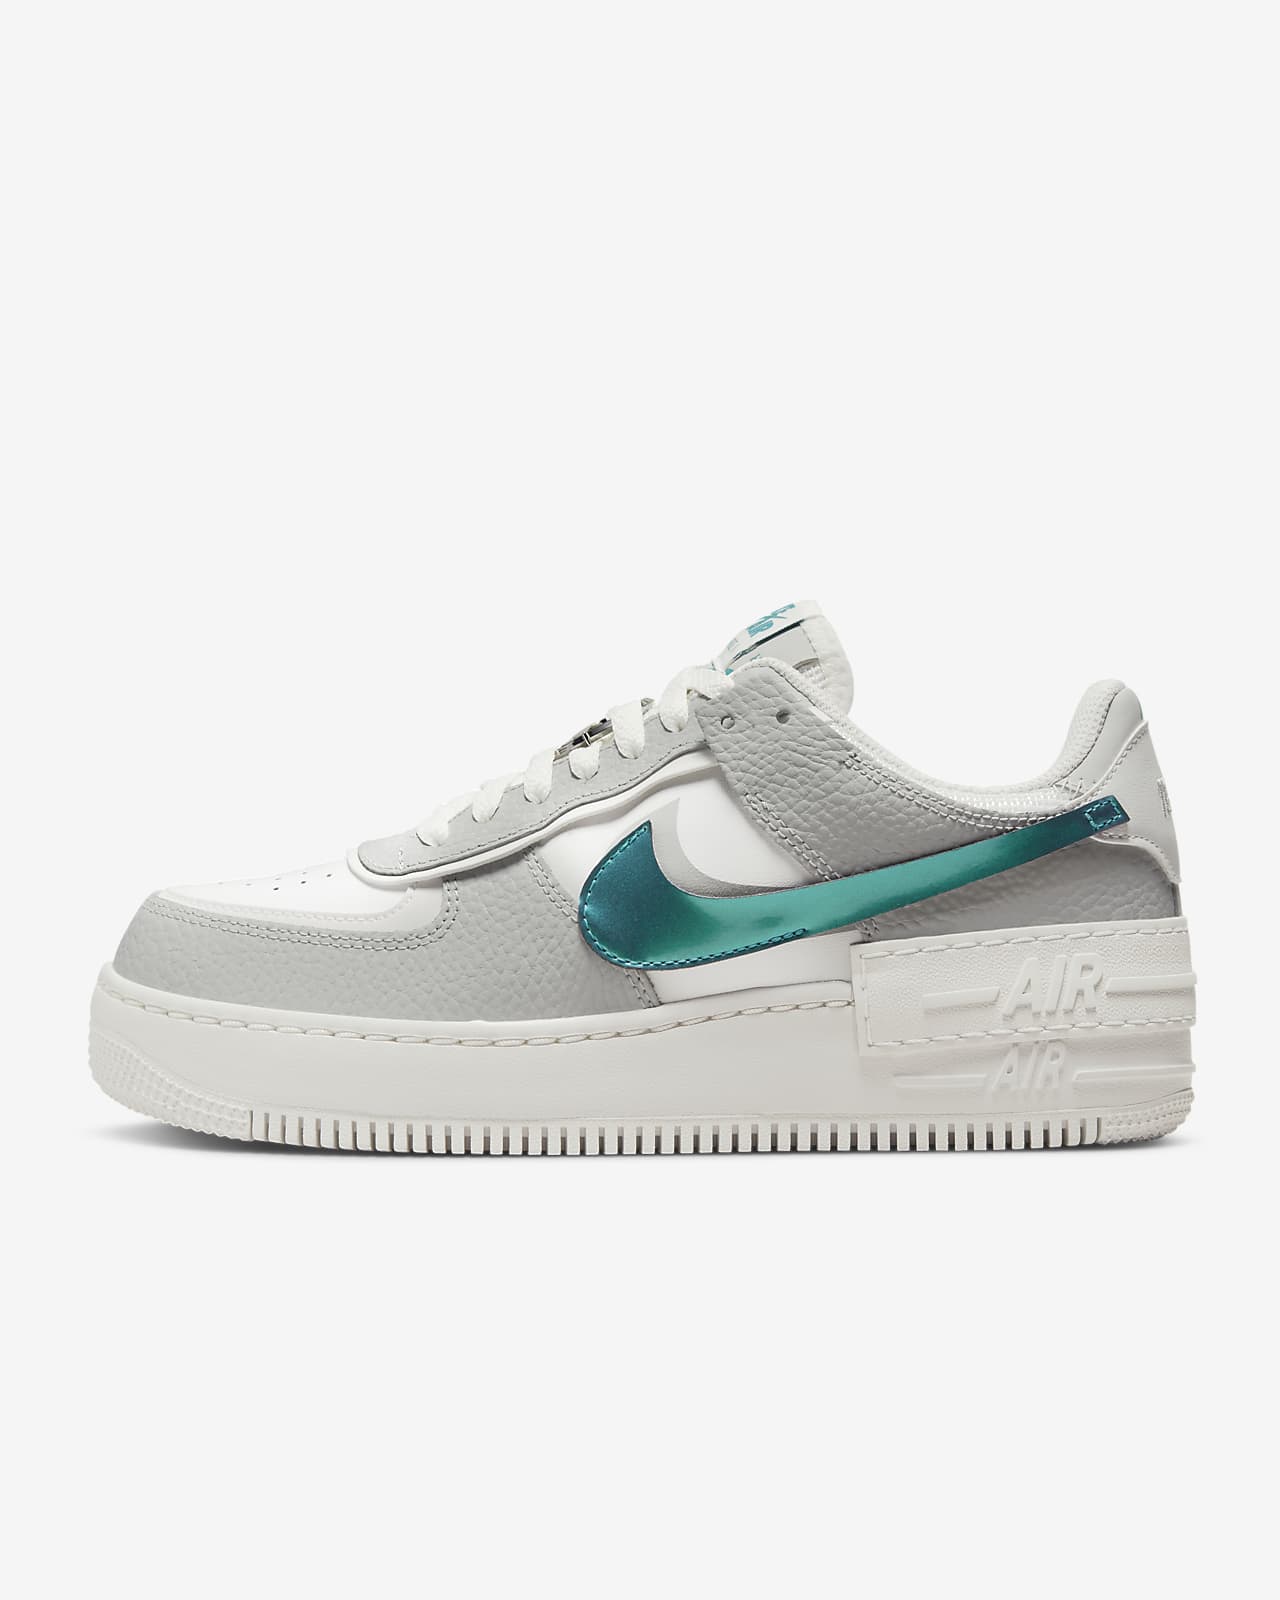 air force 1 pastel femme shadow